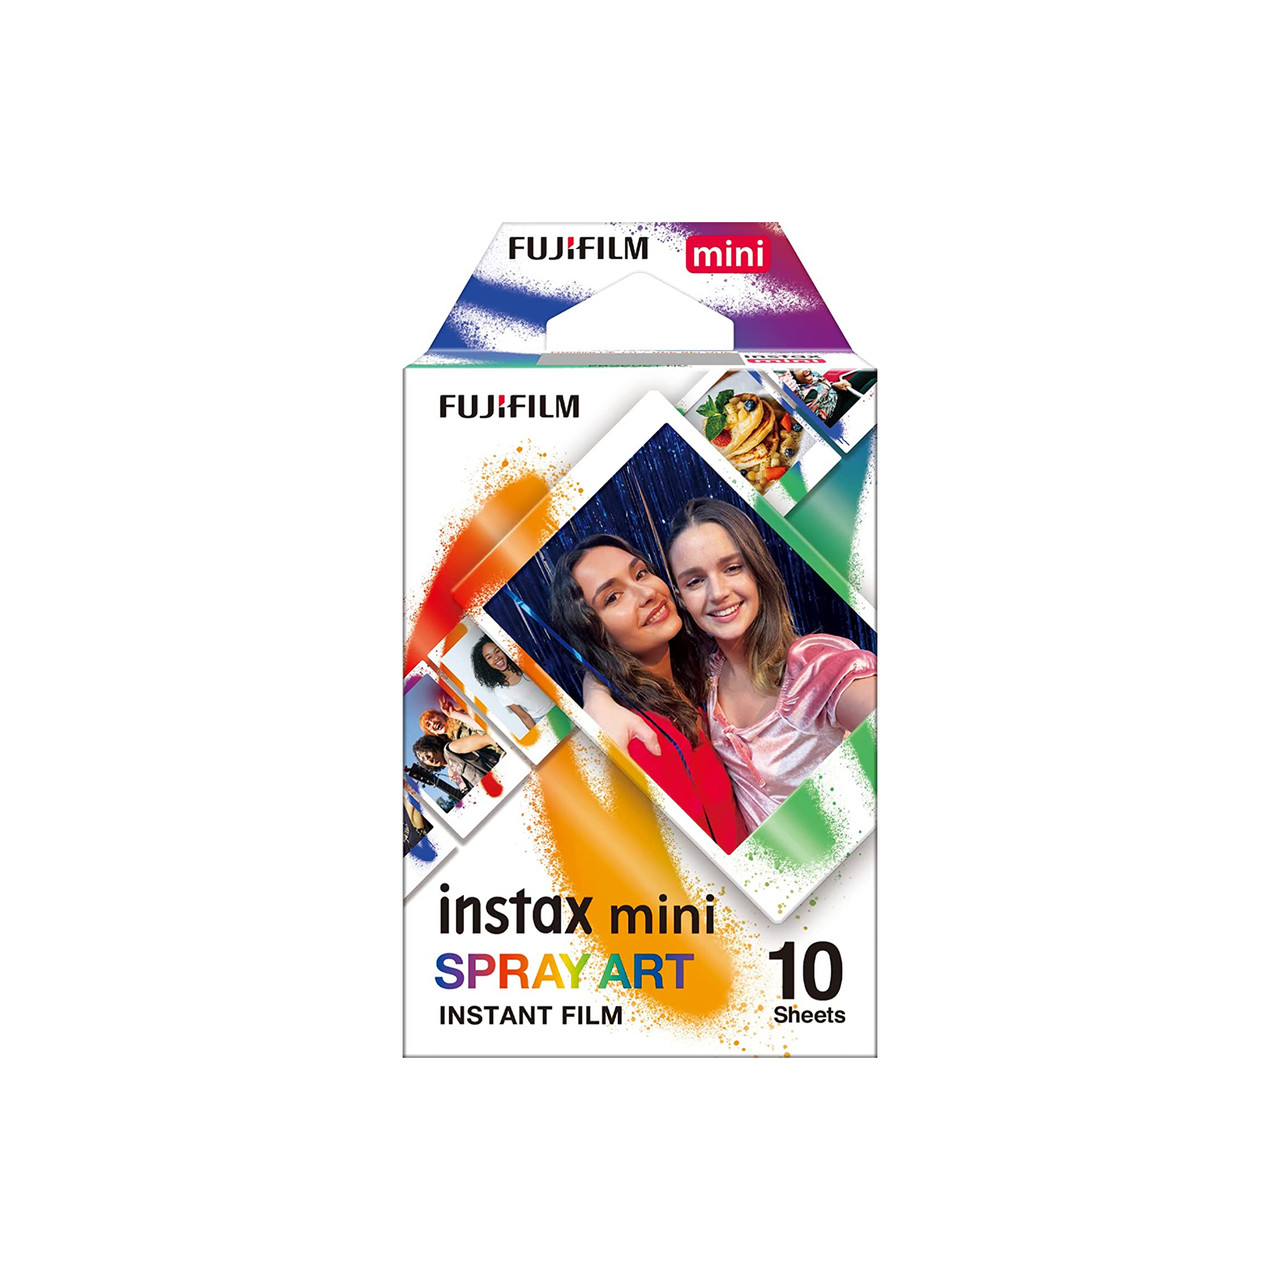 Depicted is a front-facing packshot of the Instax Mini Spray Art 10-piece film package.